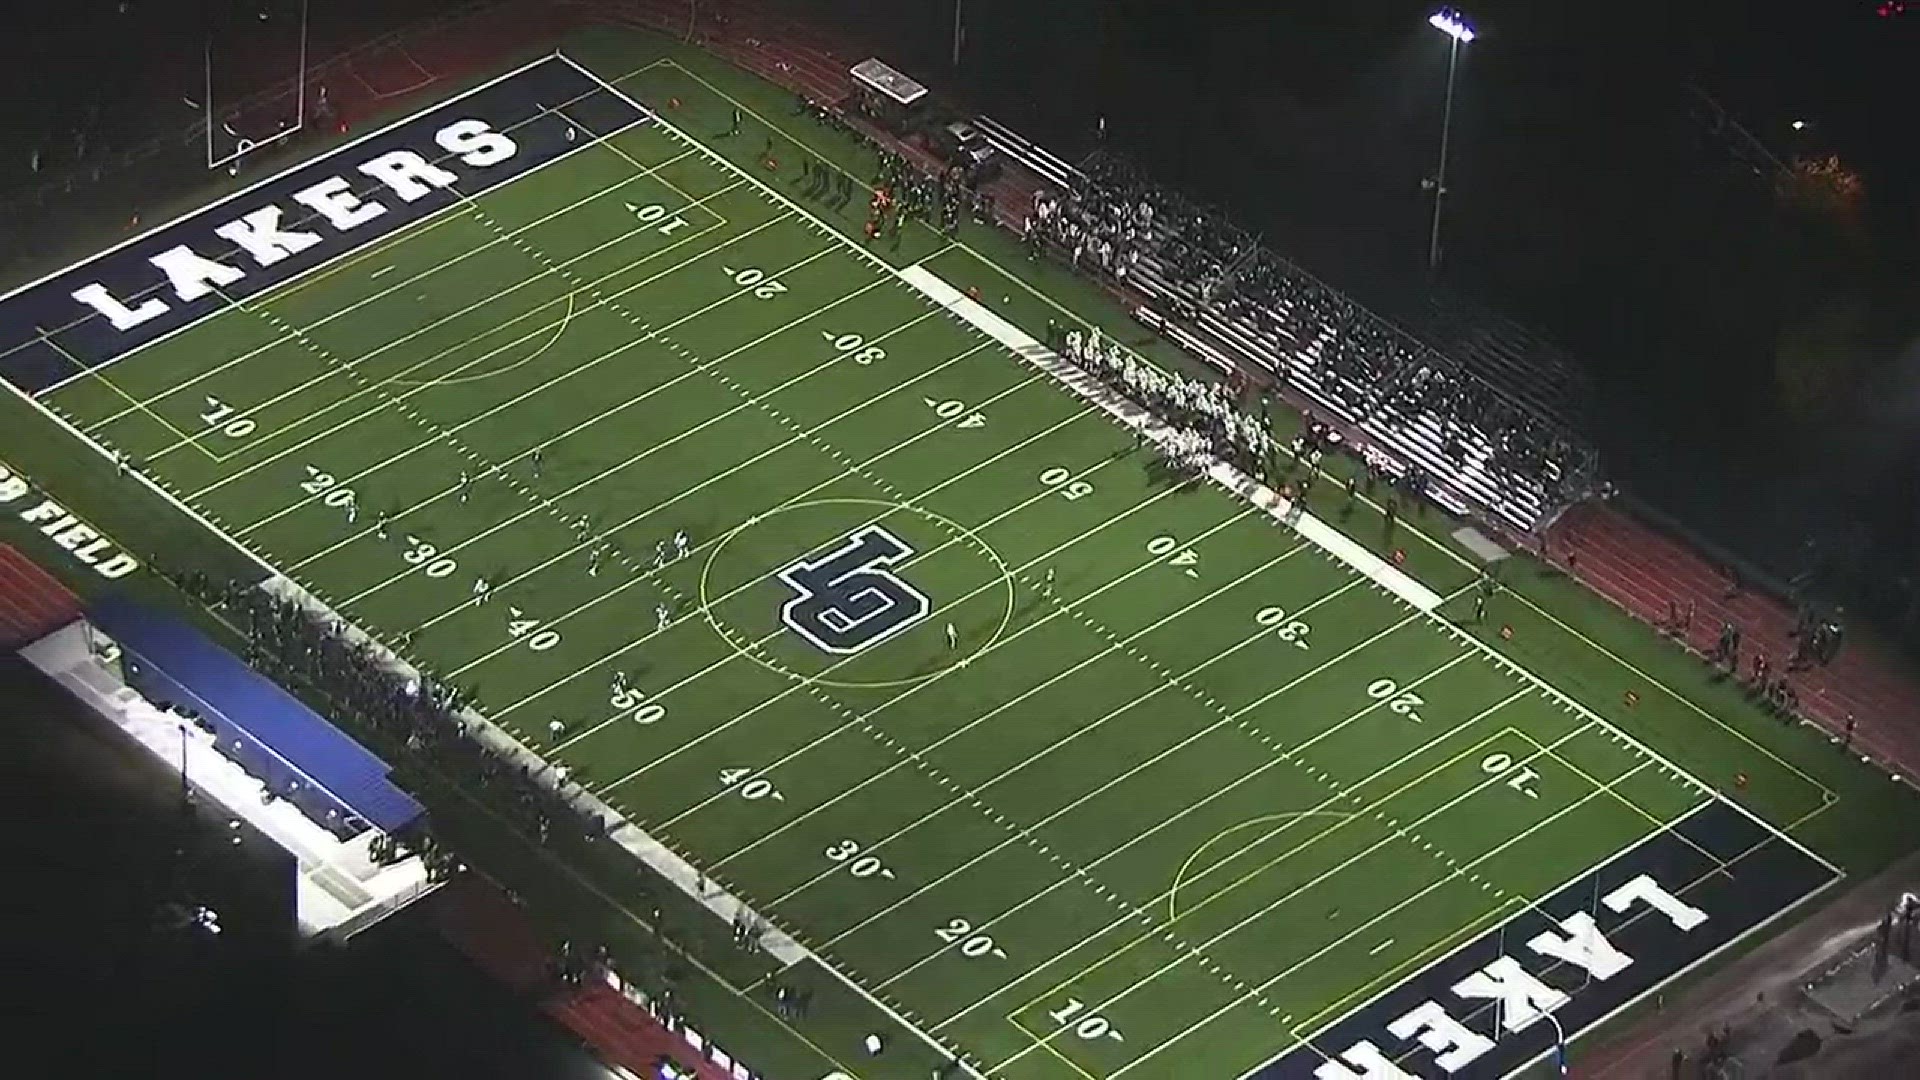 Sky 8 highlights of No. 1 Lake Oswego's 45-0 win over No. 17 Sherwood in the second round of the playoffs on Nov. 10, 2017.